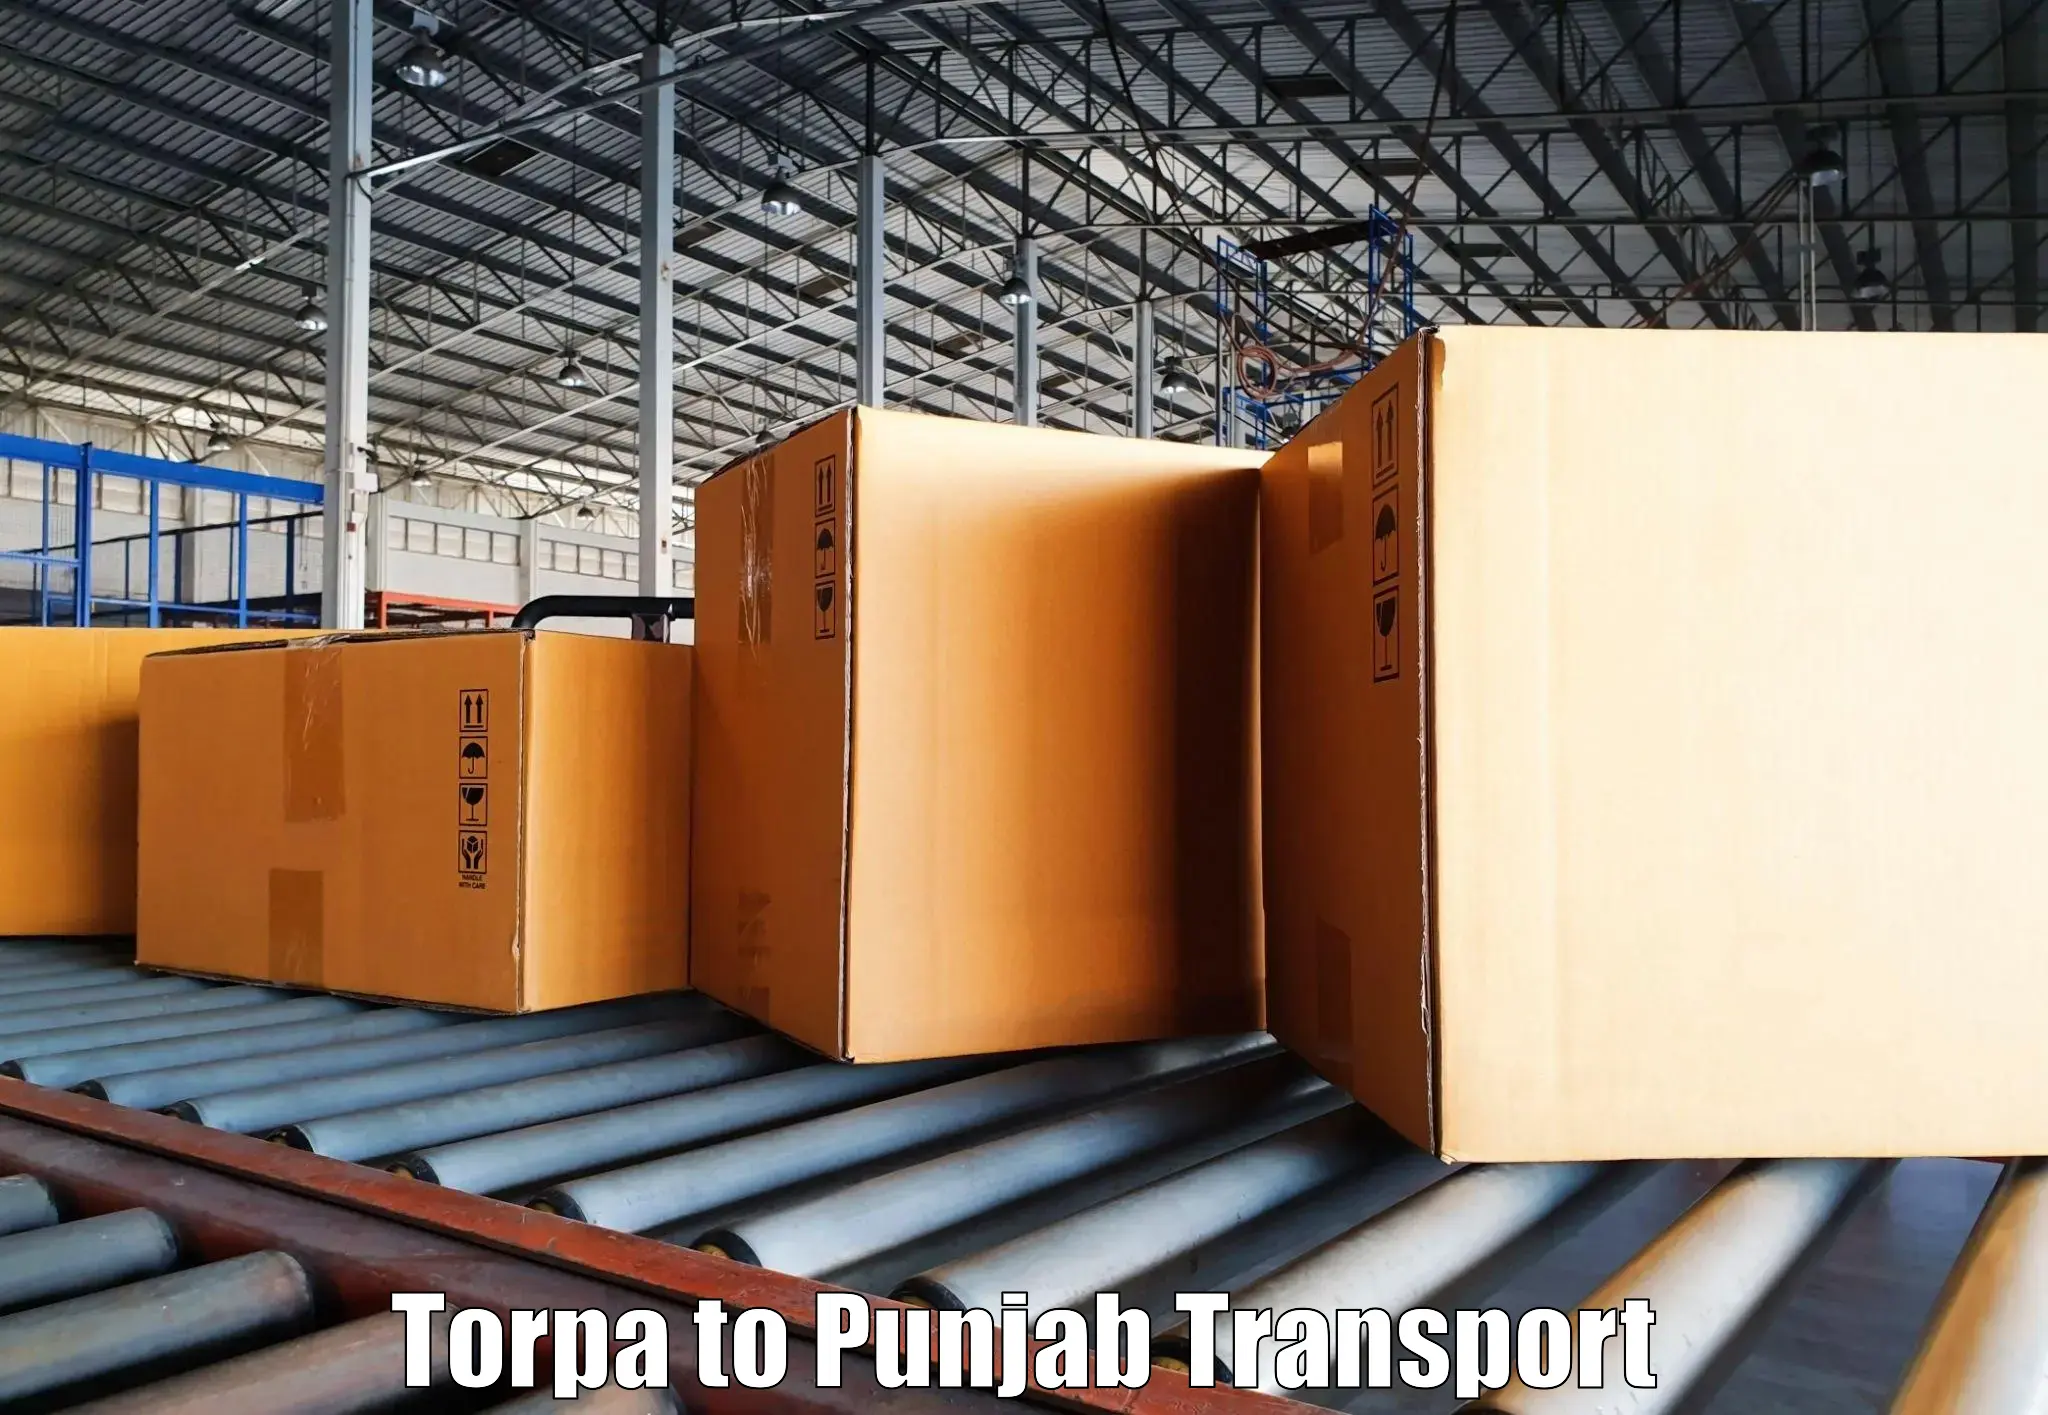 Nearby transport service Torpa to Punjab